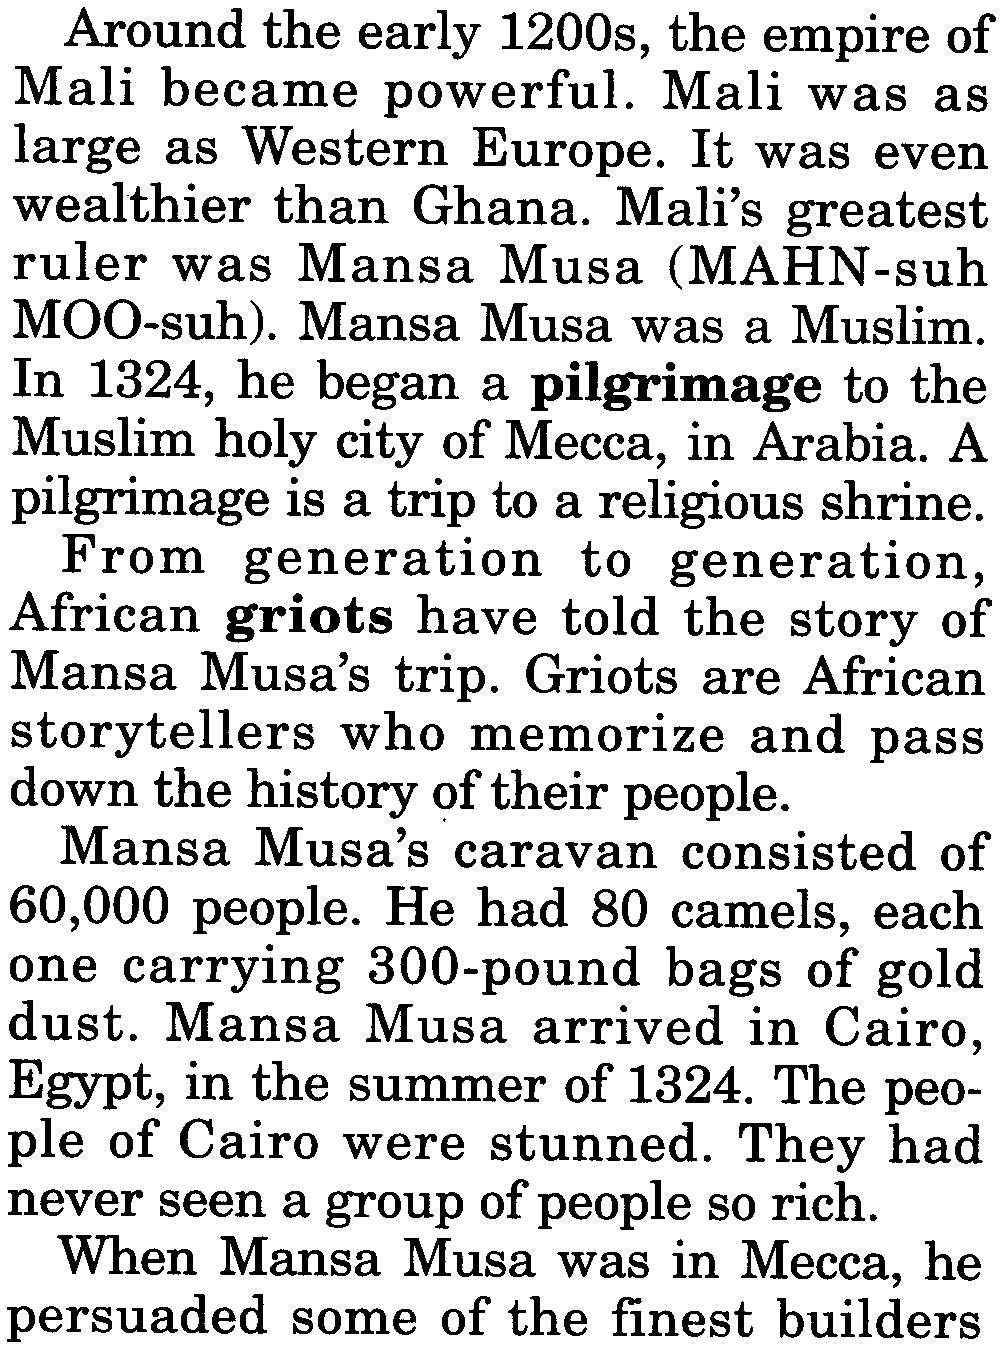 Griots are African storytellers who memorize and pass down the history of their people. Mansa Musa's caravan consisted of 60,000 people.